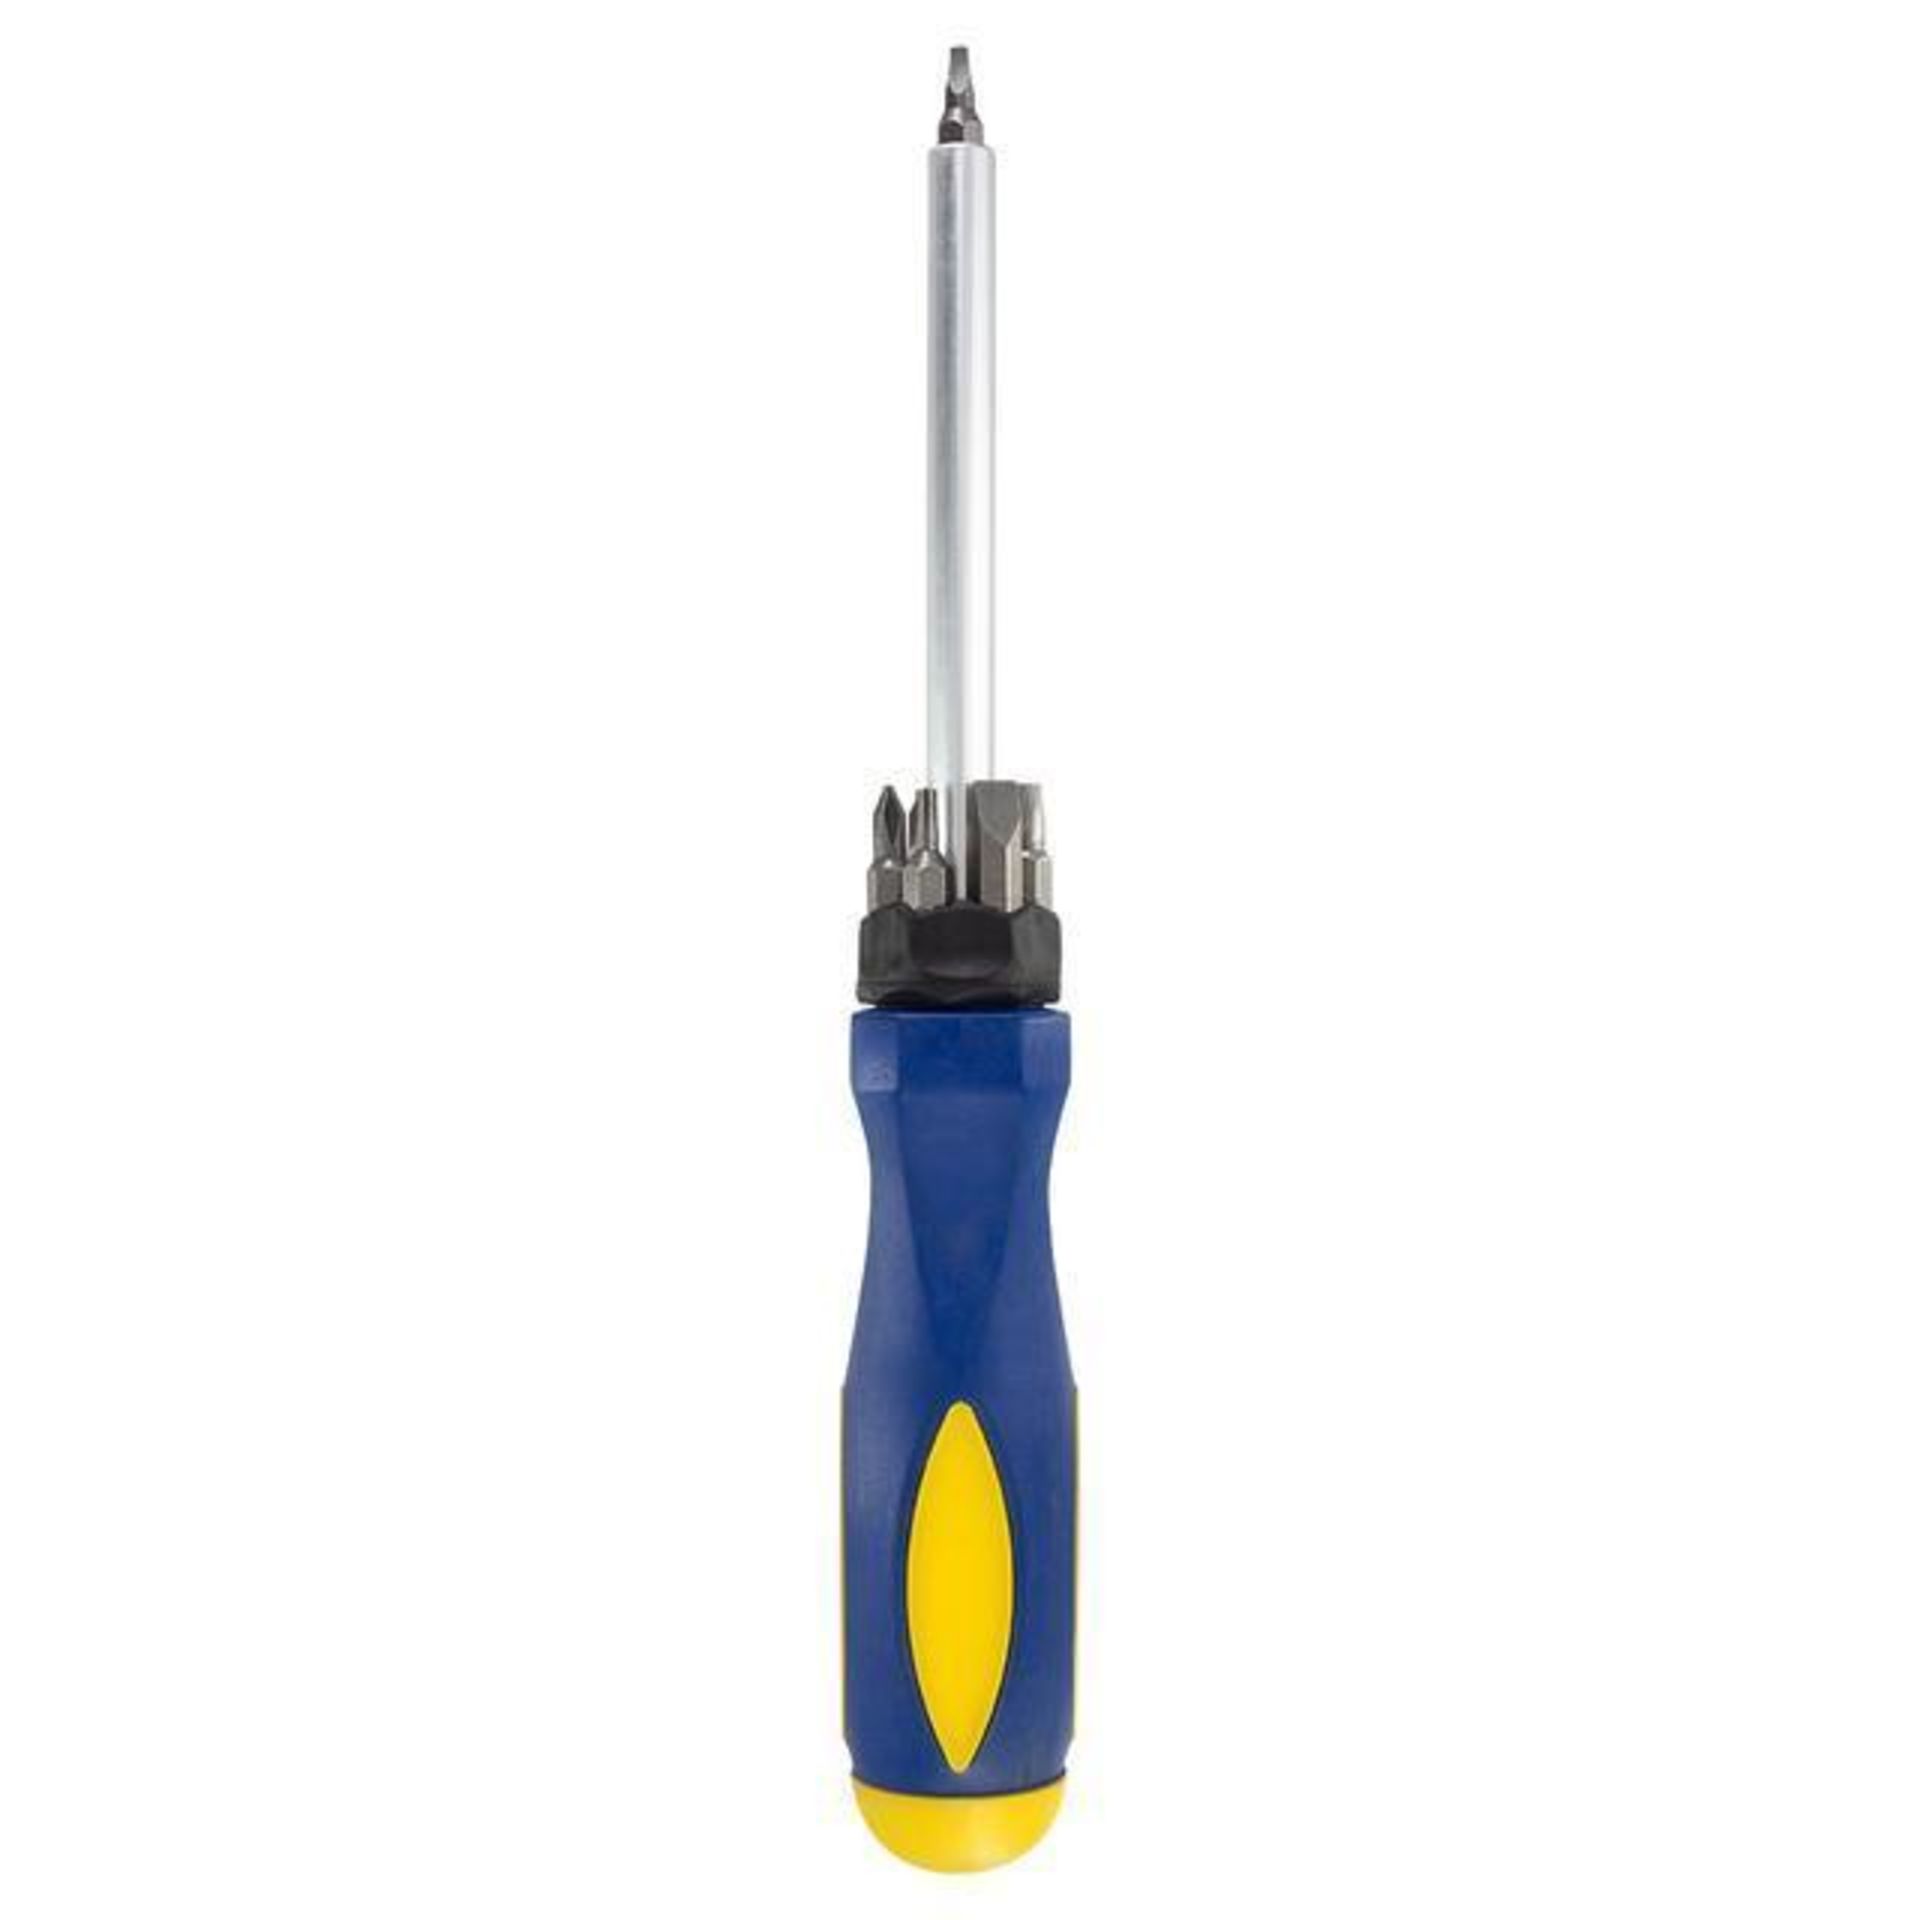 DESCRIPTION: (4) CASES OF 8 IN 1 MAGNETIC TELESCOPIC SCREW DRIVERS. 400 TOTAL BRAND / MODEL: EAZY PO